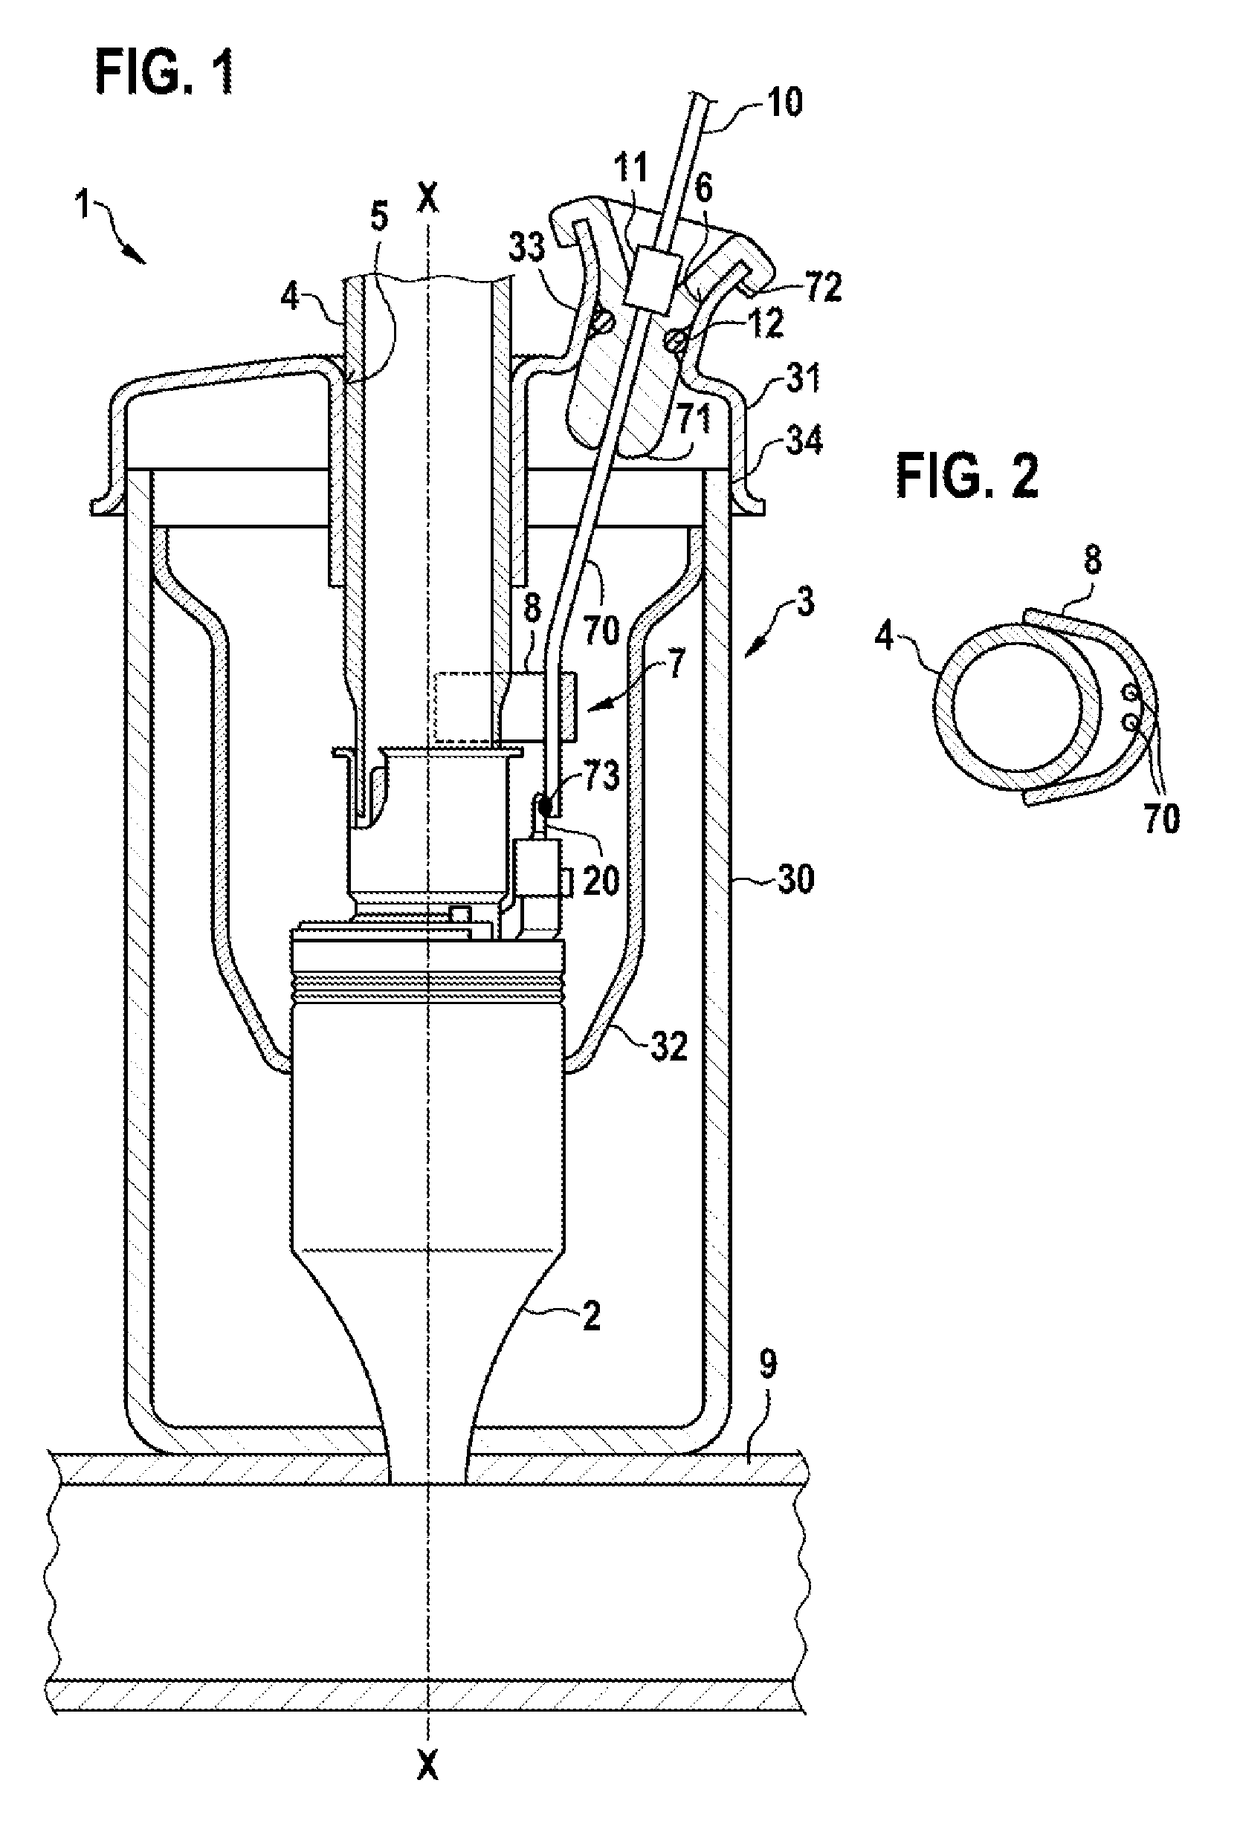 Injector assembly for metering a fluid into an exhaust line